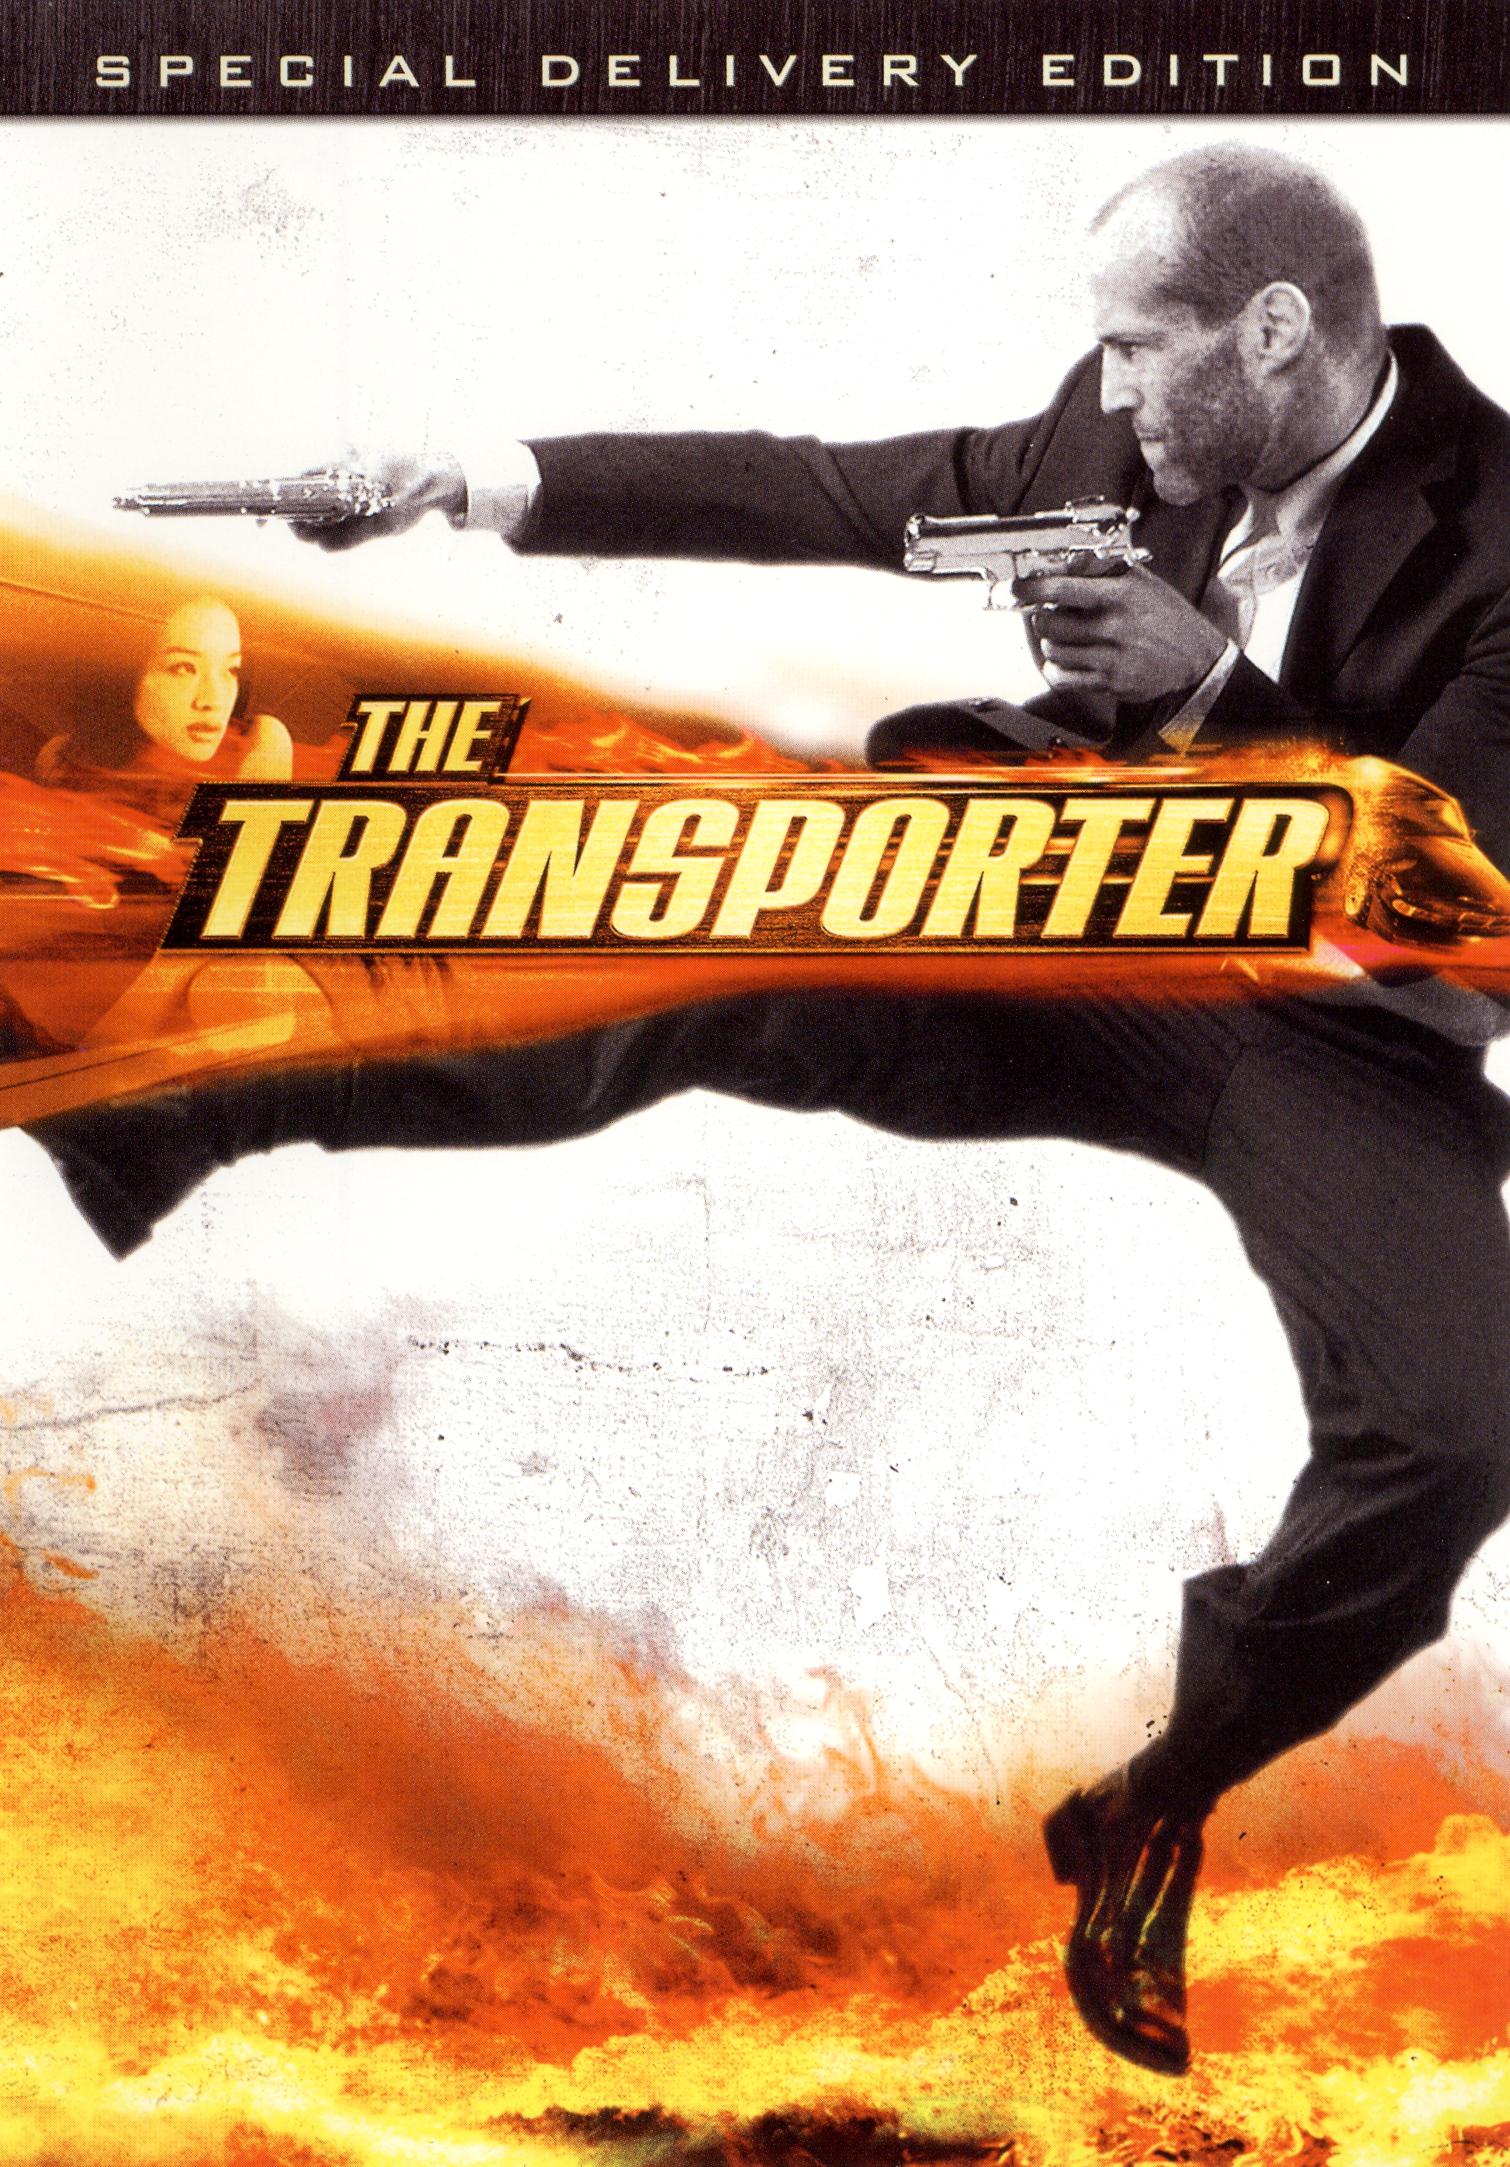 The Transporter (2002) movie at MovieScore™